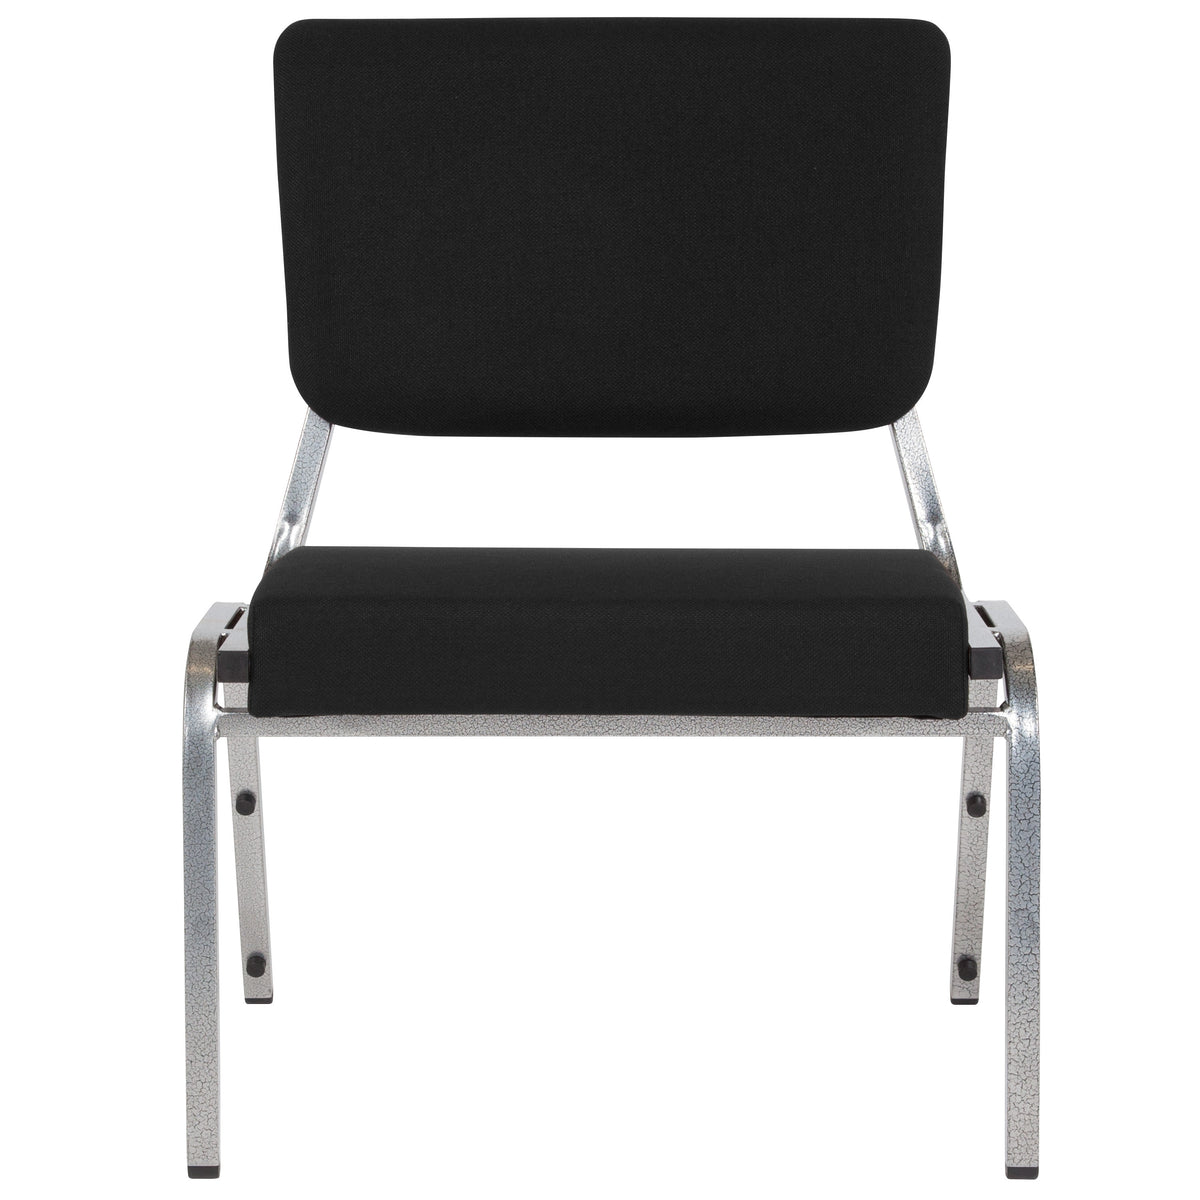 Black Fabric |#| 1000 lb. Rated Black Antimicrobial Fabric Bariatric Medical Reception Chair